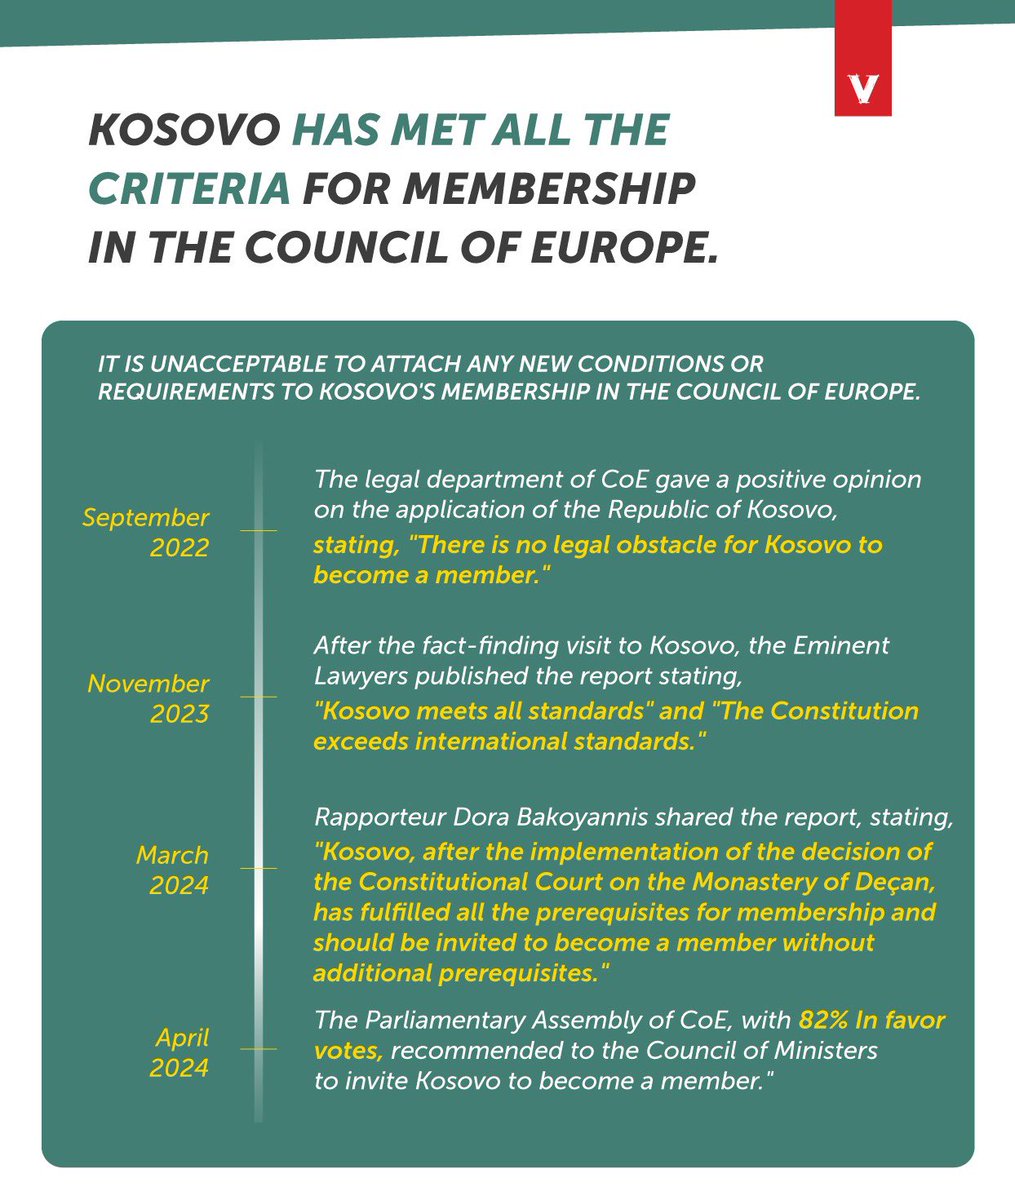 RKS🇽🇰 has met all criteria for @CoE membership! Attaching new conditions is unacceptable. Reports confirm Kosova's readiness. It's time for Kosova to be part of @CoE! #KosovaInCoE 🗳️🇽🇰🇪🇺